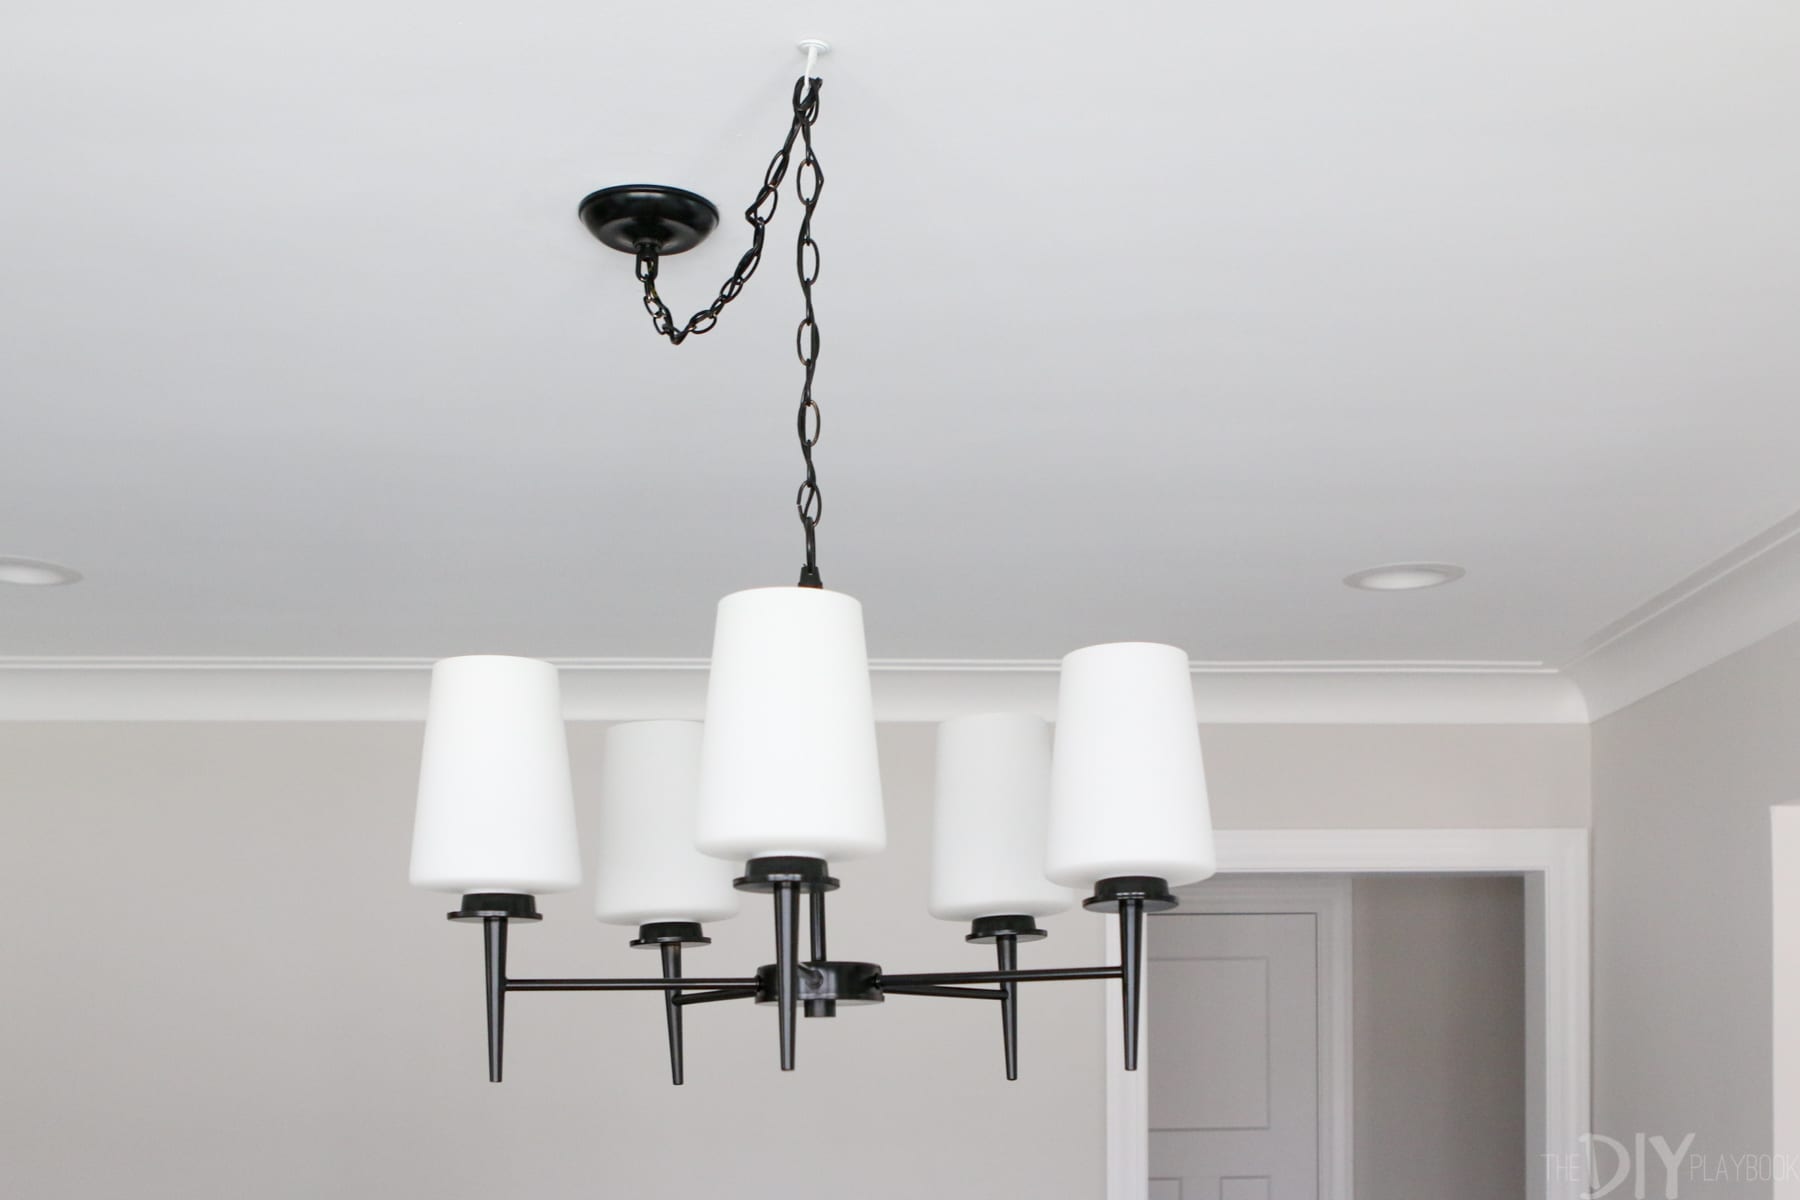 Spray Painting A Light Fixture Black For The Dining Room The Diy Playbook